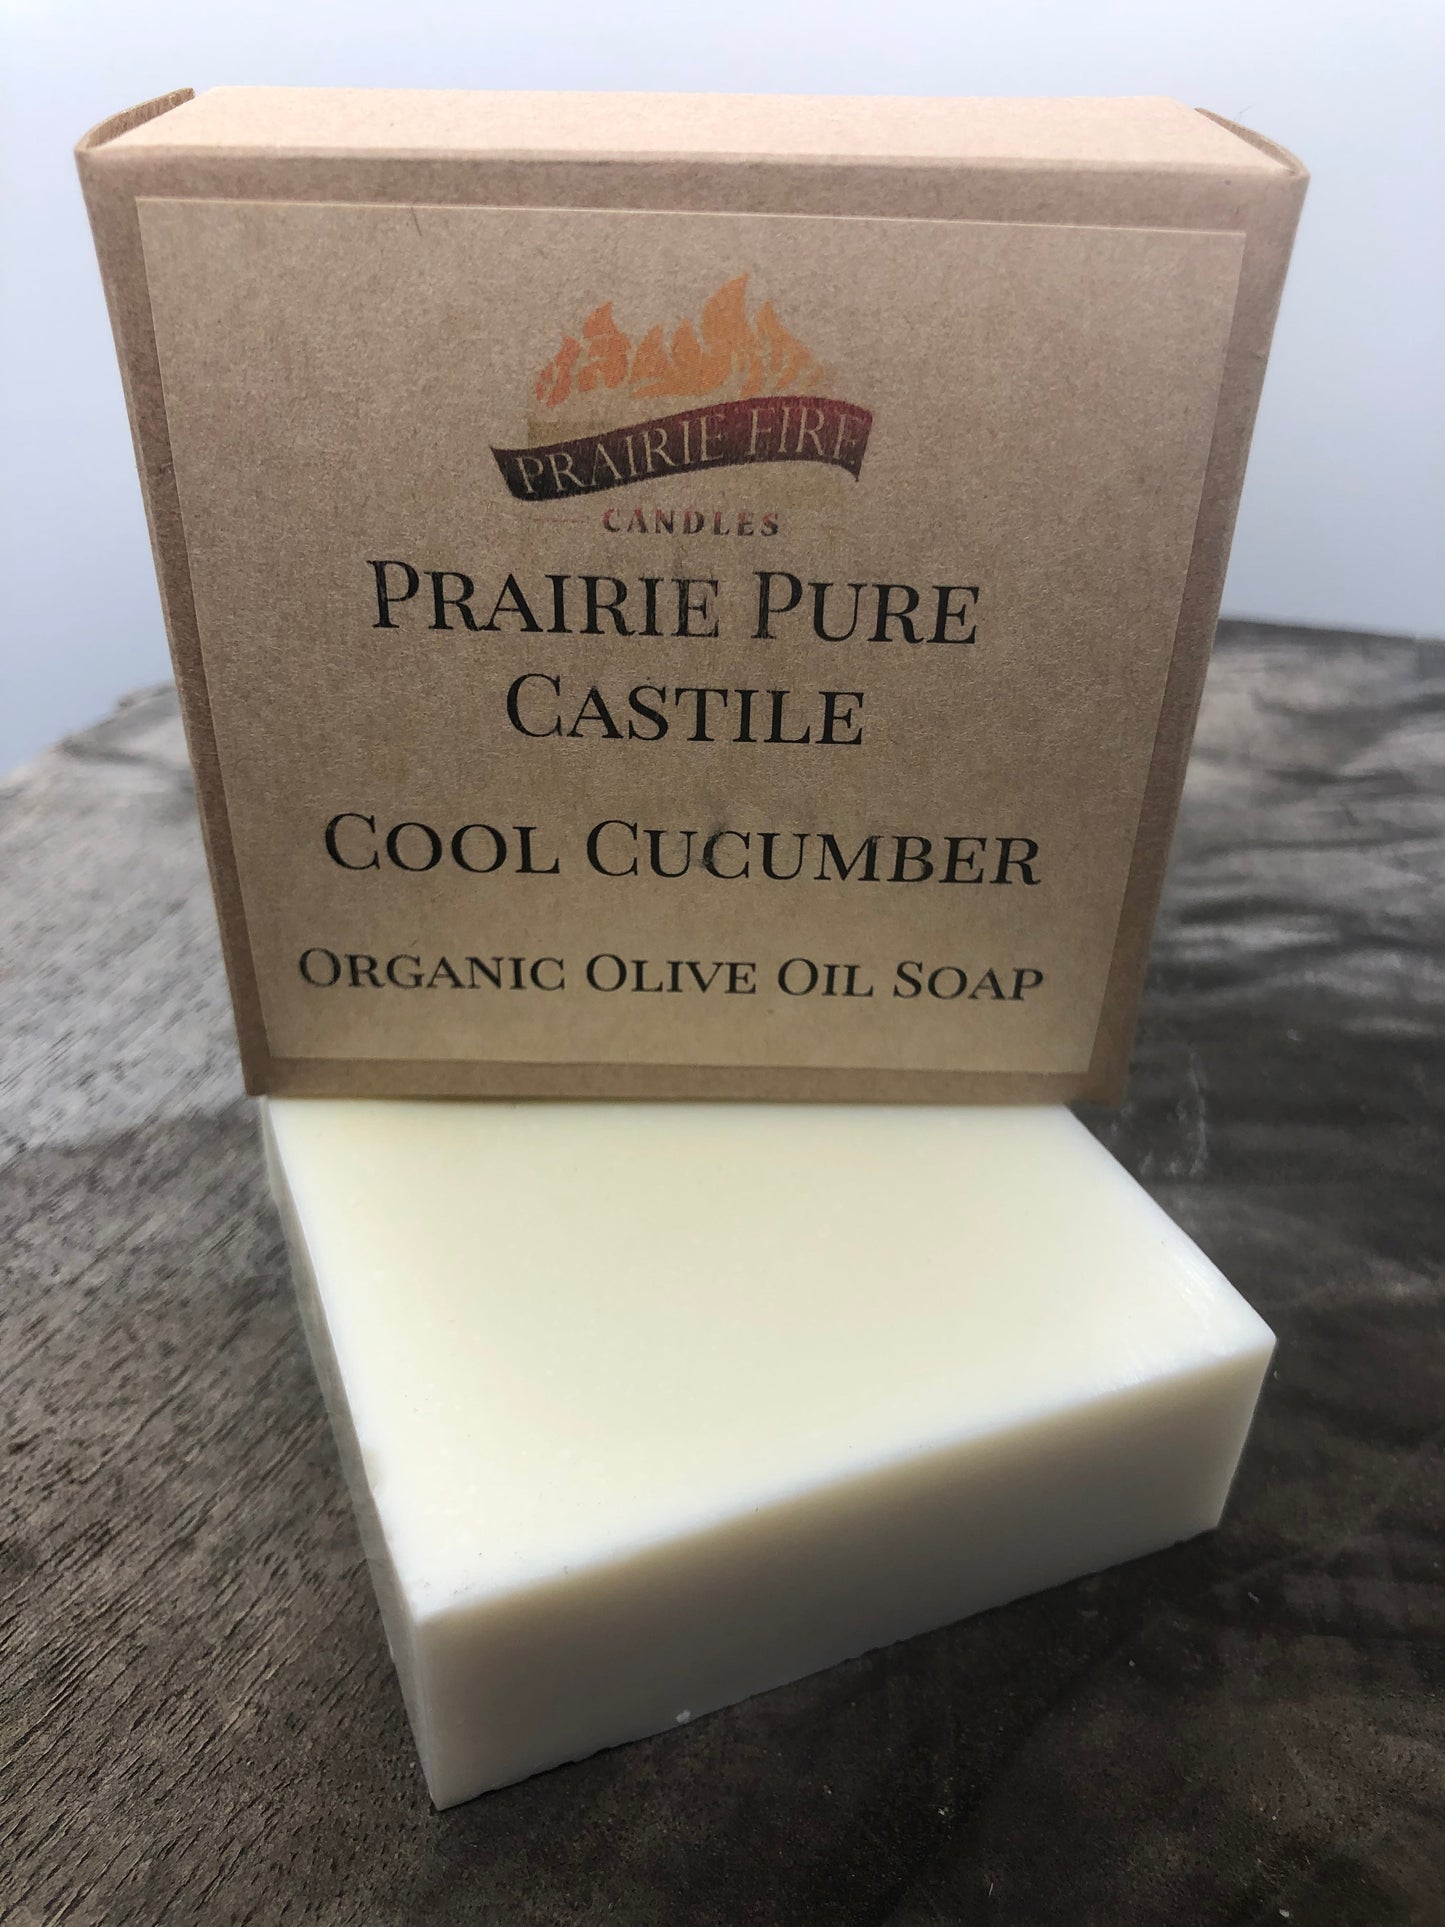 Cool Cucumber Real Castile Organic Olive Oil Soap for Sensitive Skin - Dye Free - 100% Certified Organic Extra Virgin Olive Oil